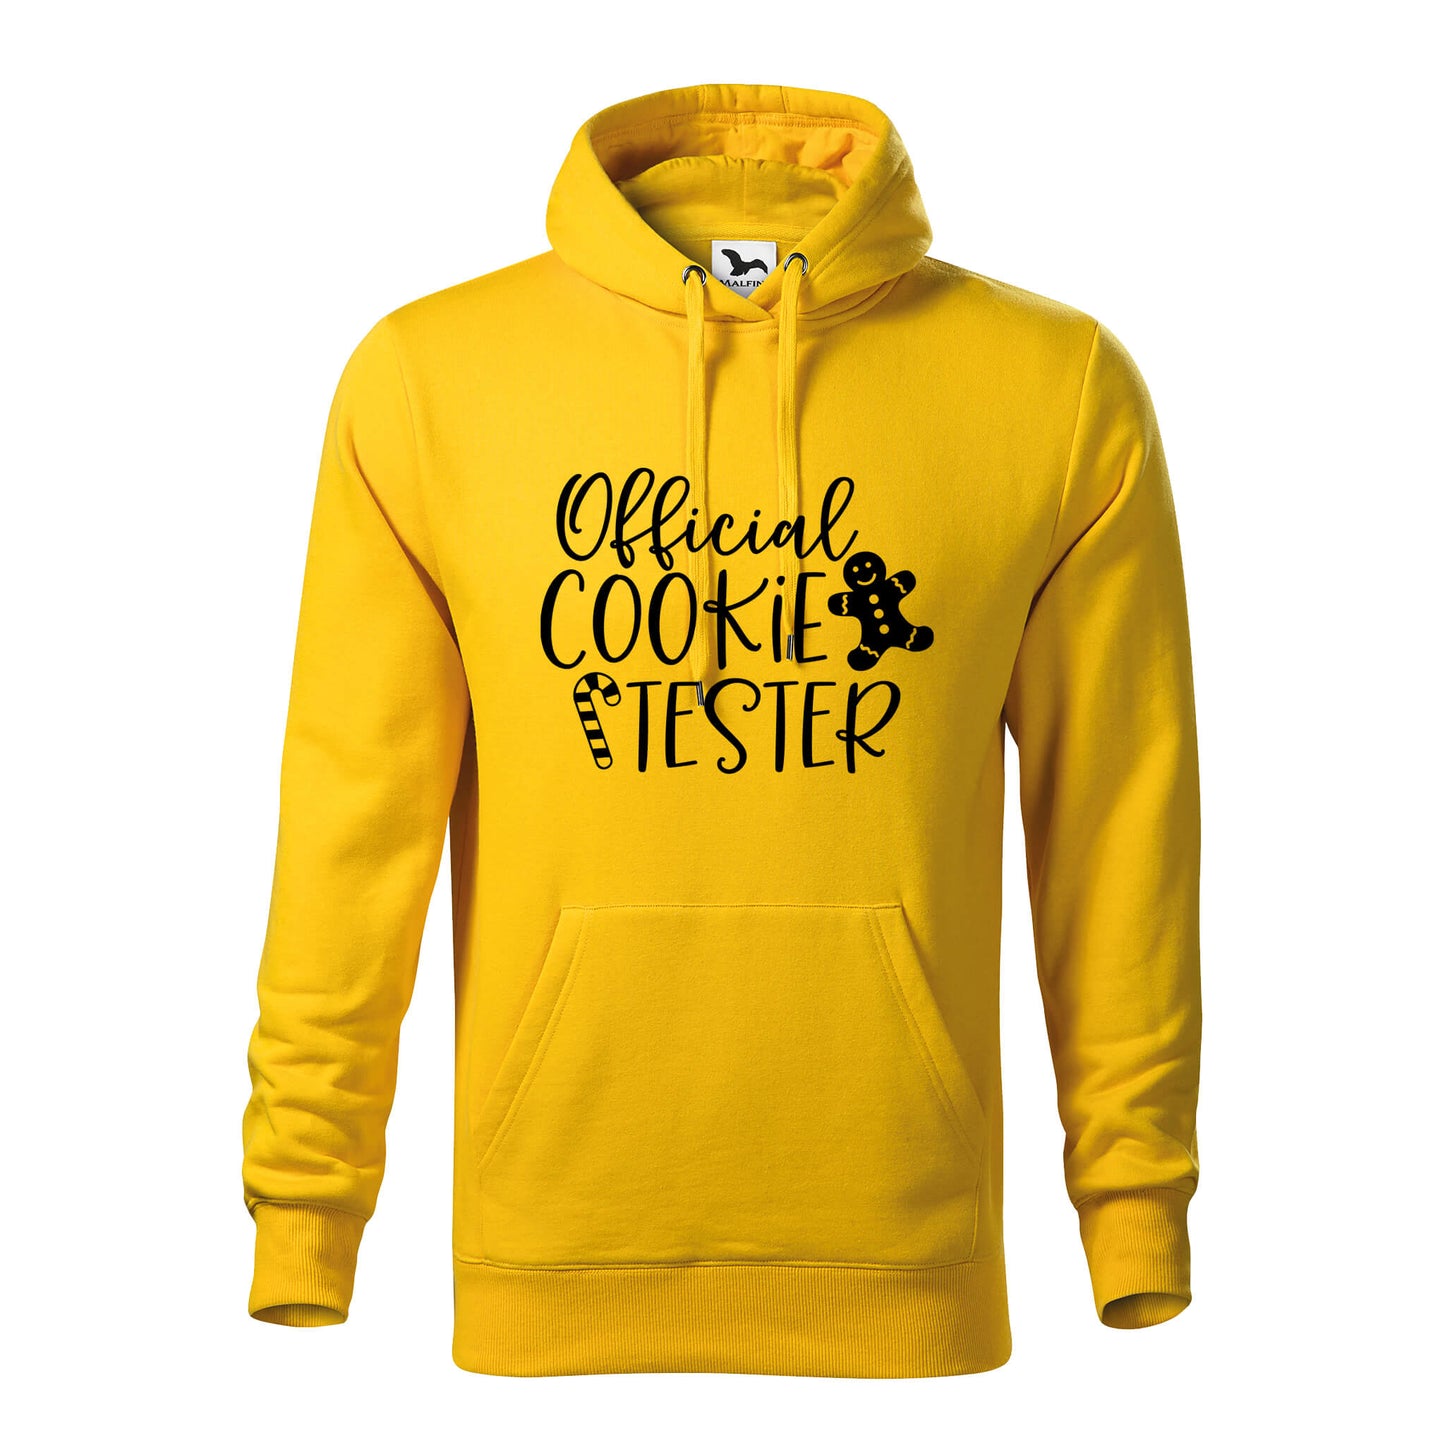 Official cookie tester new hoodie - rvdesignprint